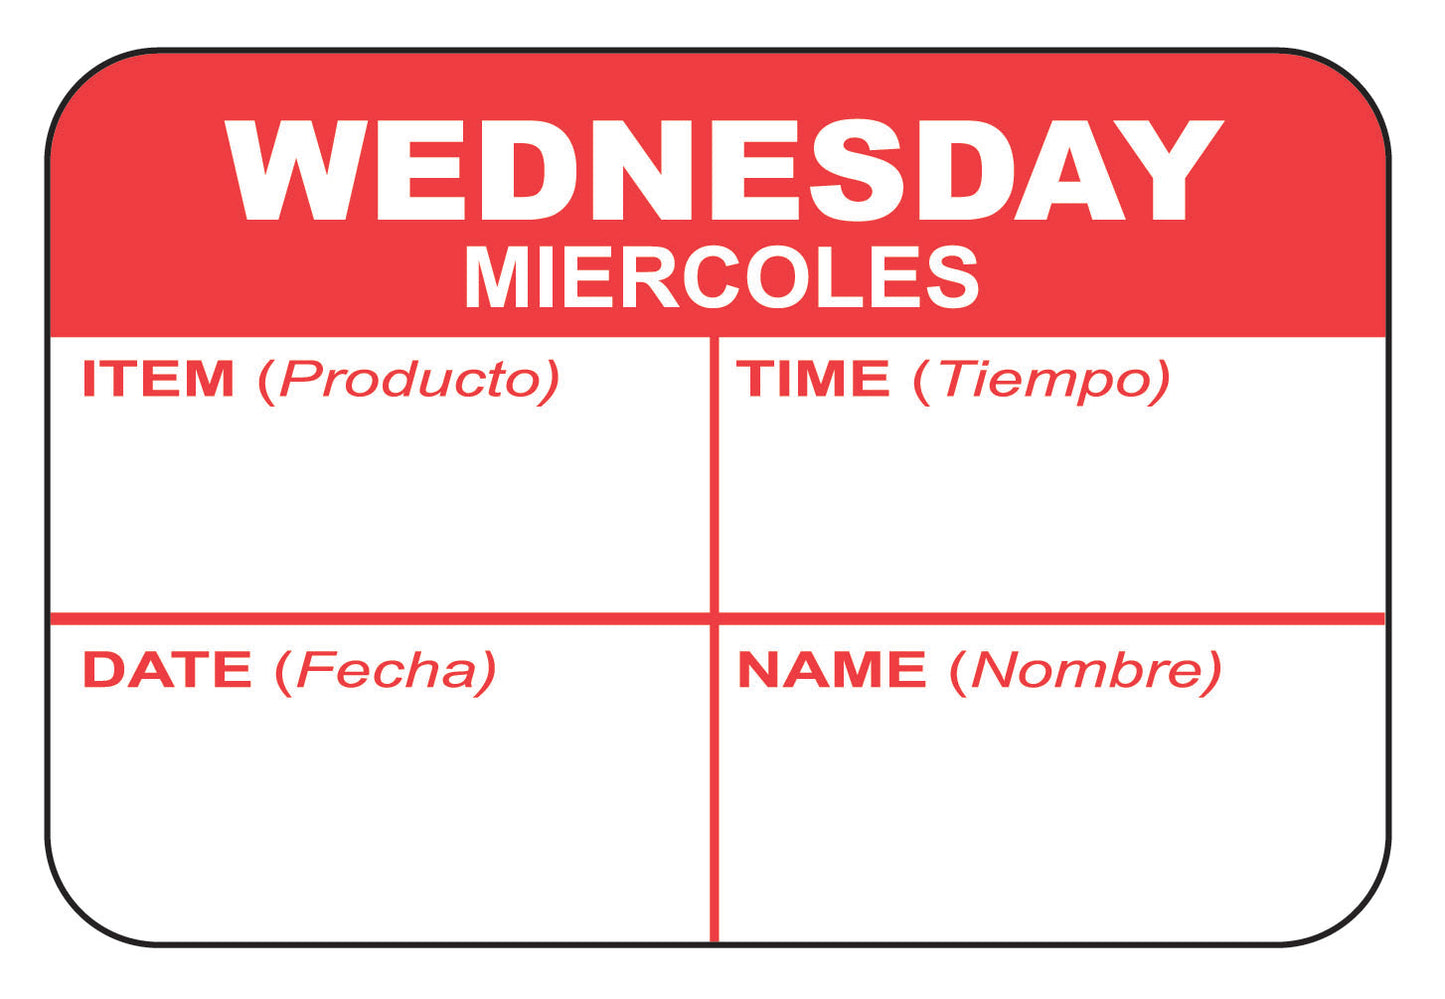 Wednesday - Miercoles 1" x 1.5" Dissolvable "Quad" Day of the Week Date Label